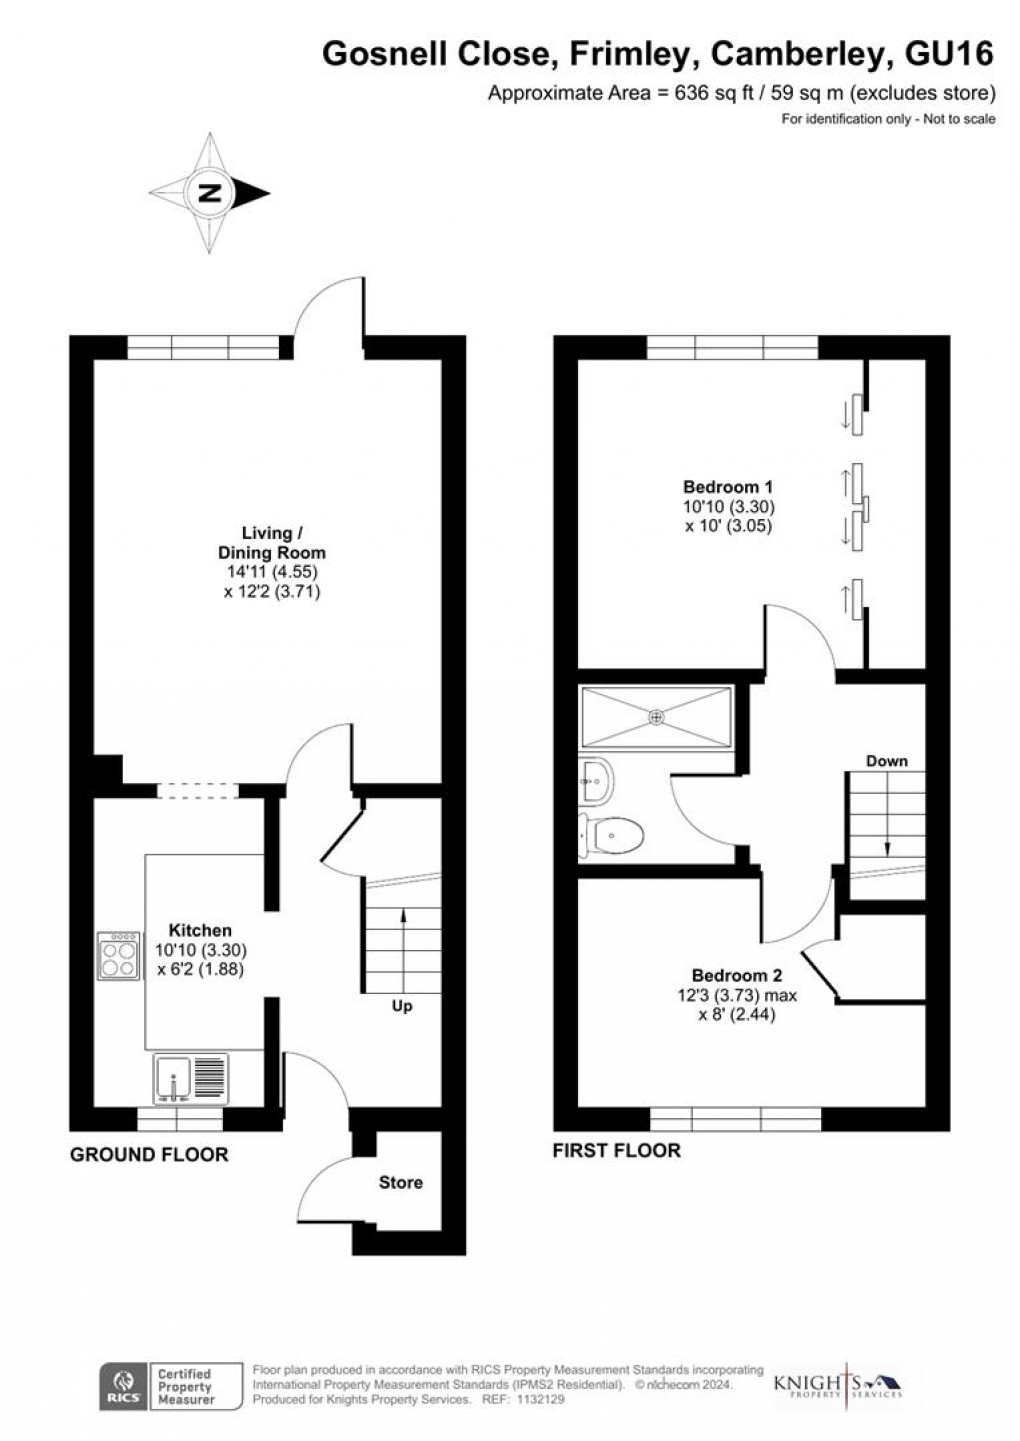 Floorplan for Gosnell Close, Frimley, Camberley